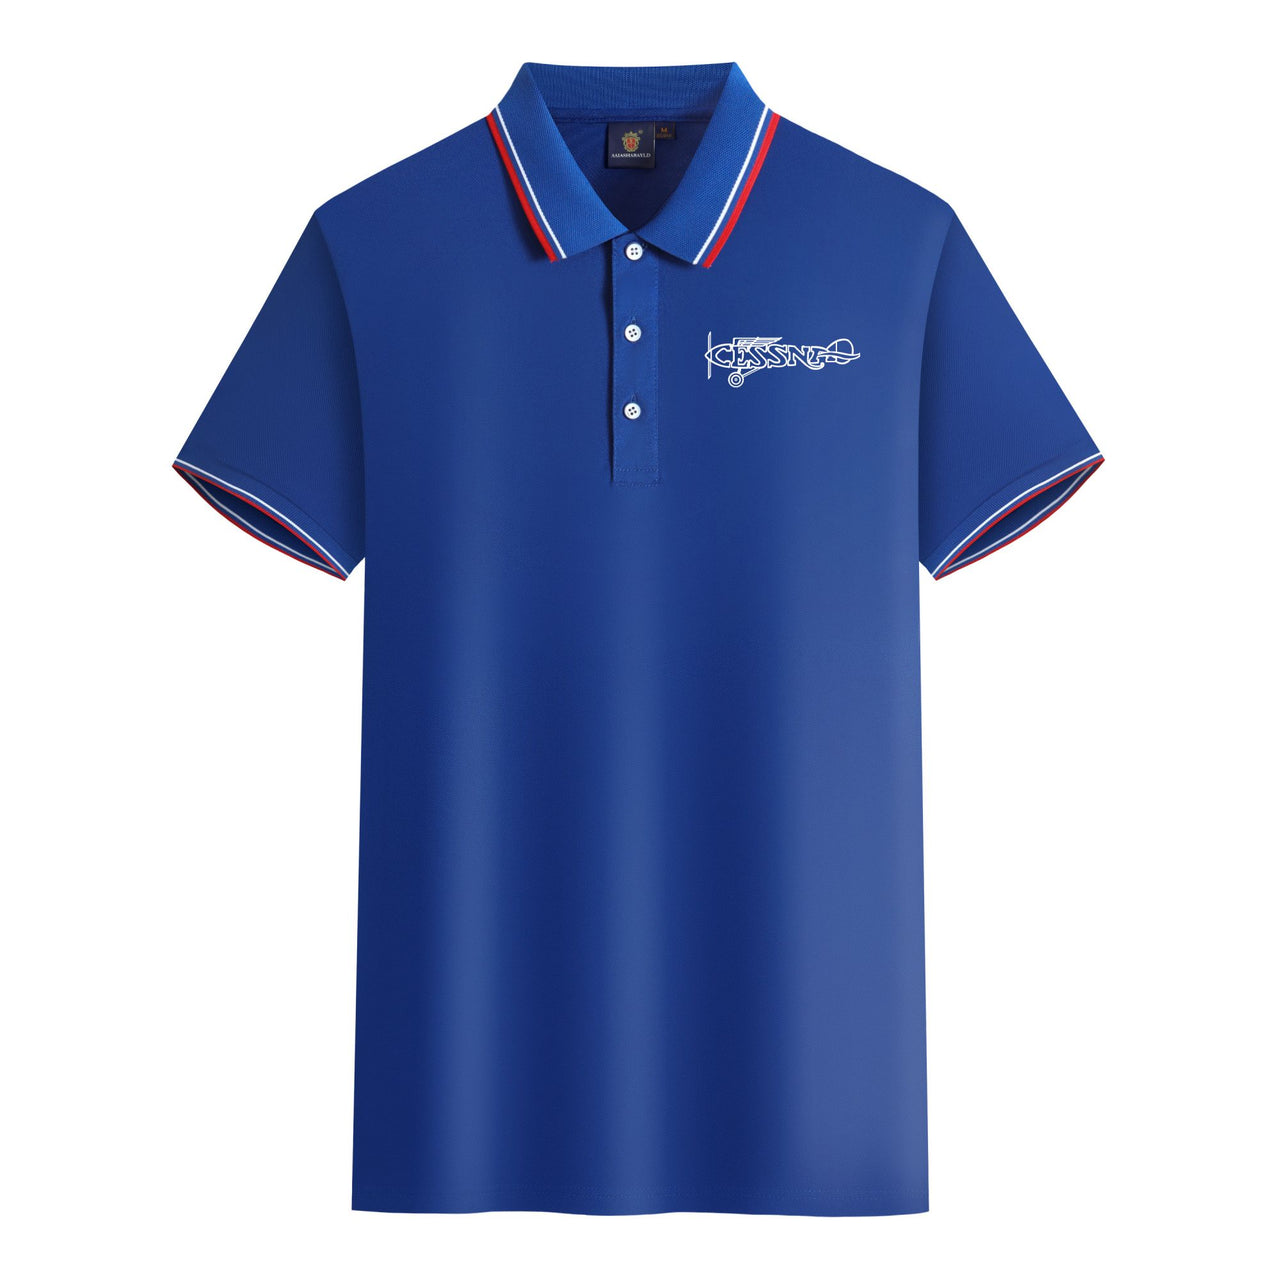 Special Cessna Text Designed Stylish Polo T-Shirts